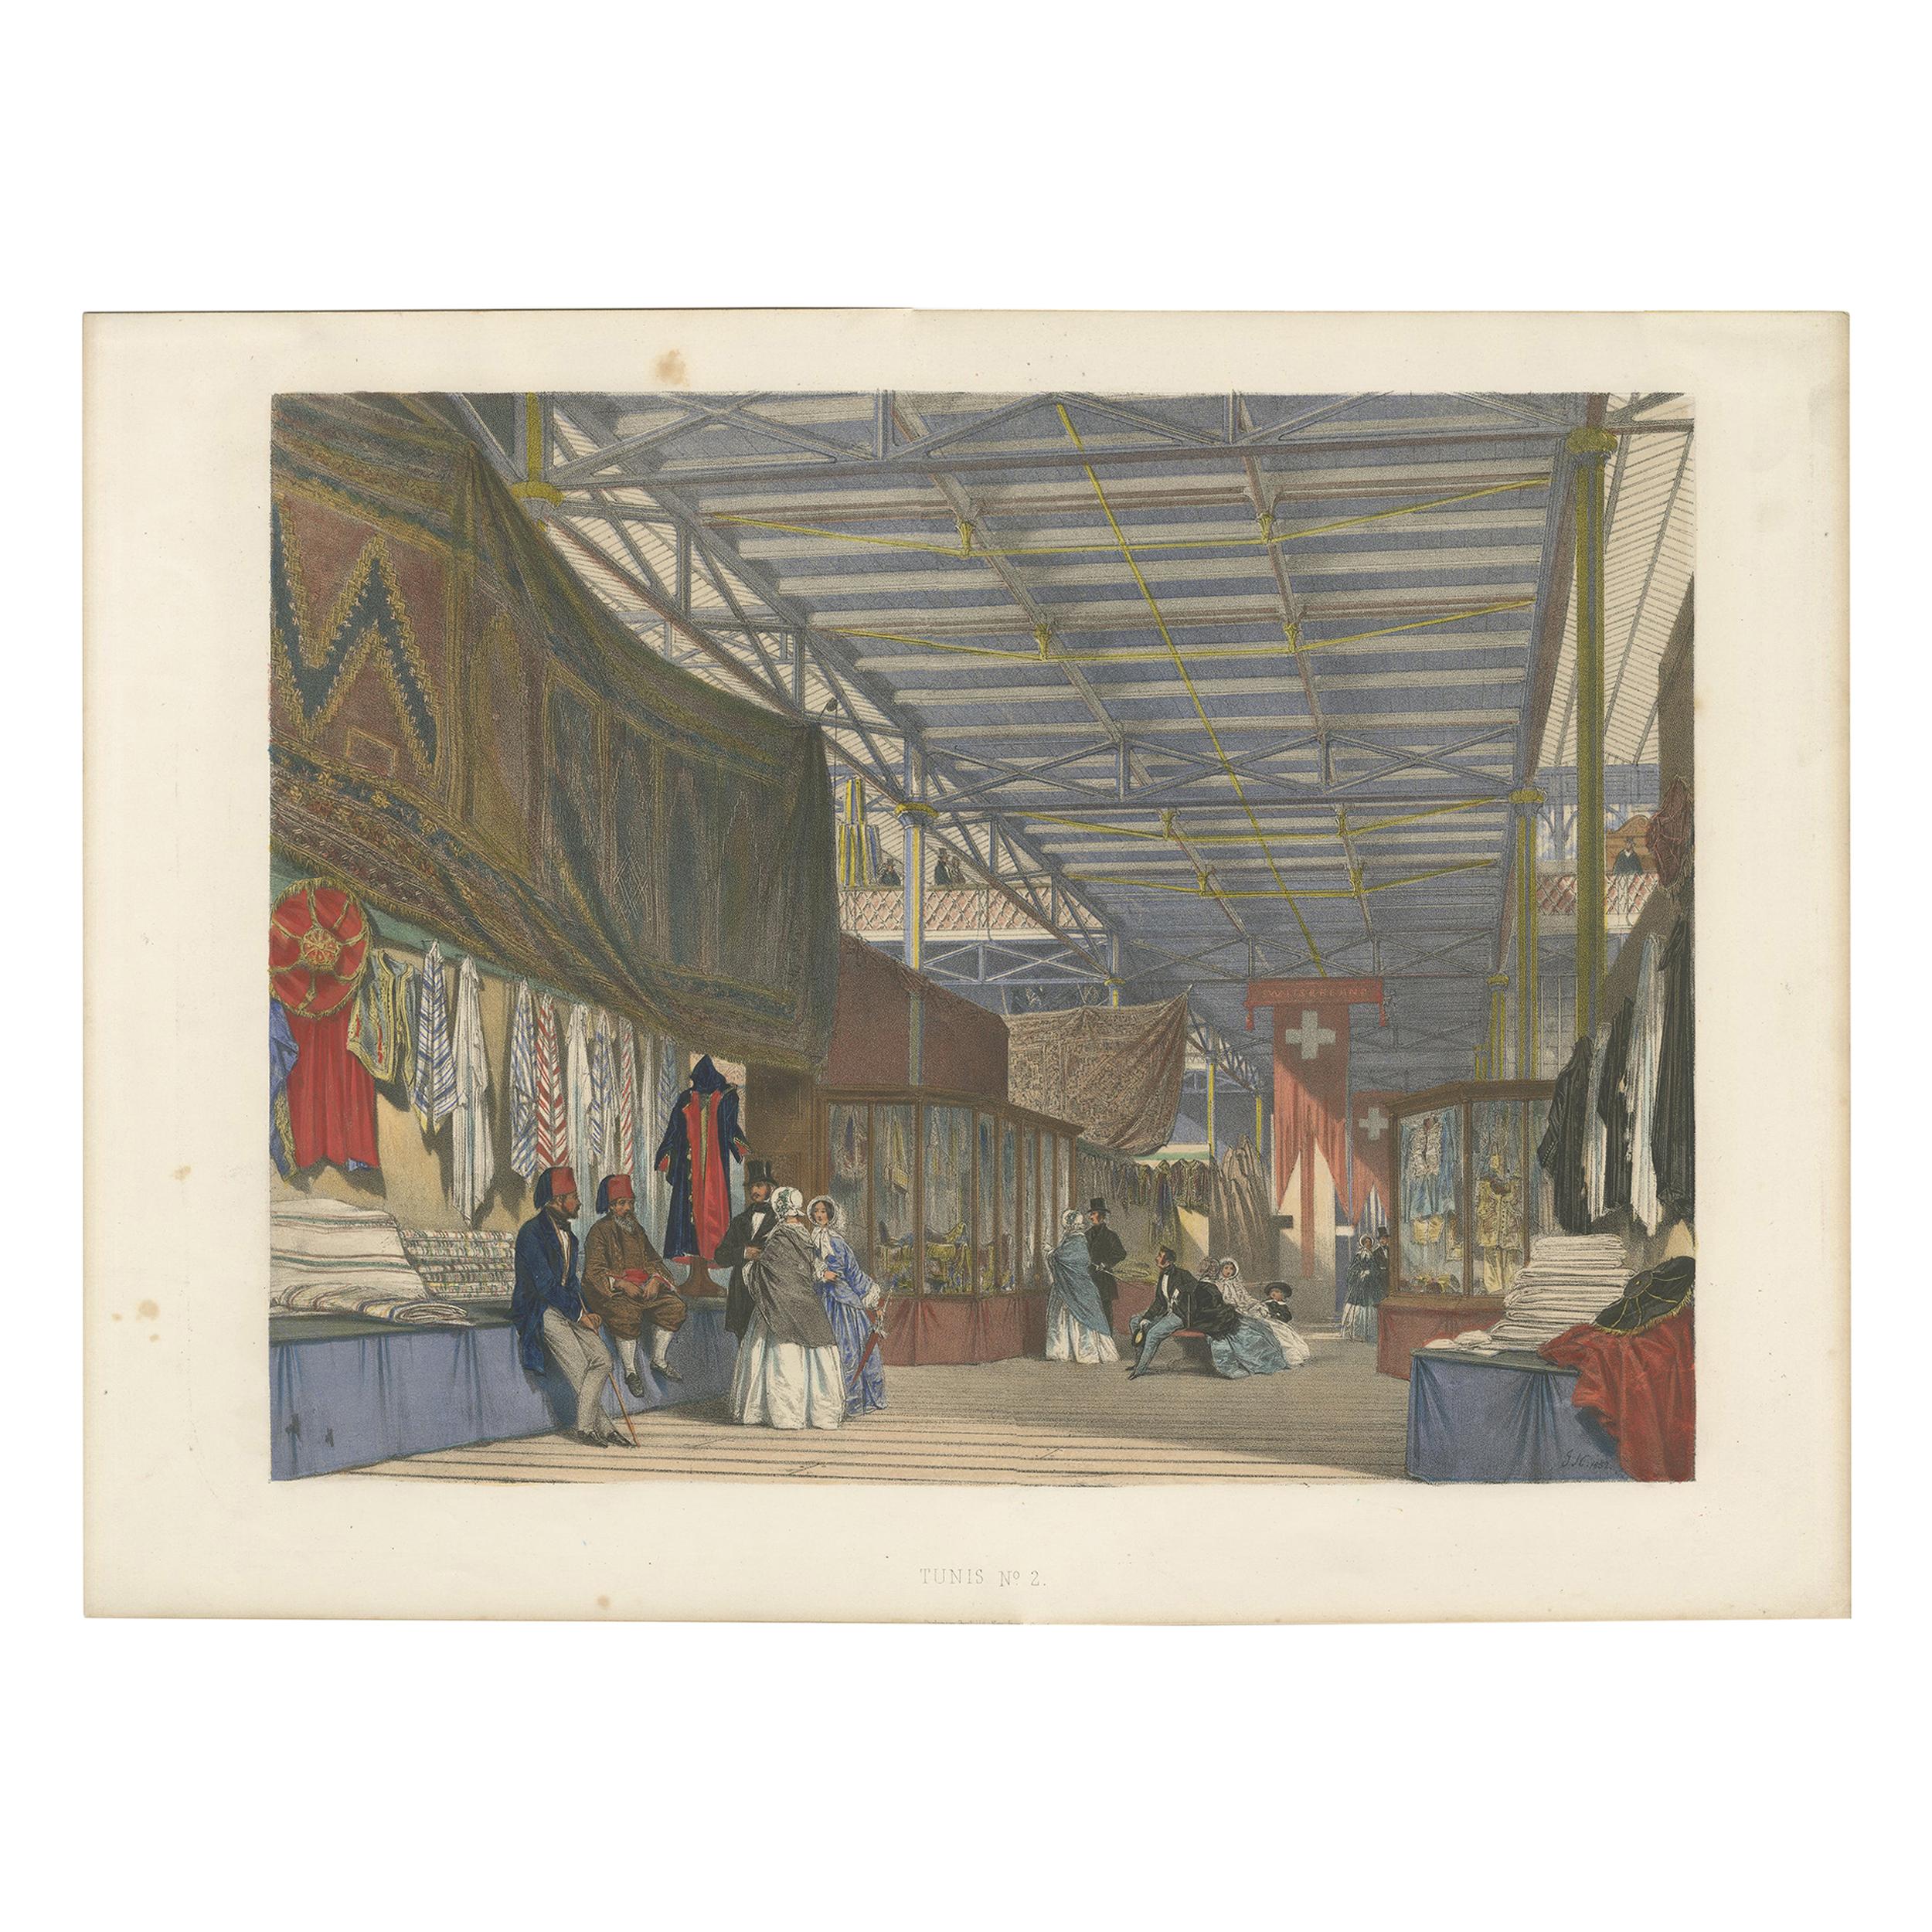 Antique Print of the Tunisian Stand at the Great Exhibition by Dickinson, '1854'